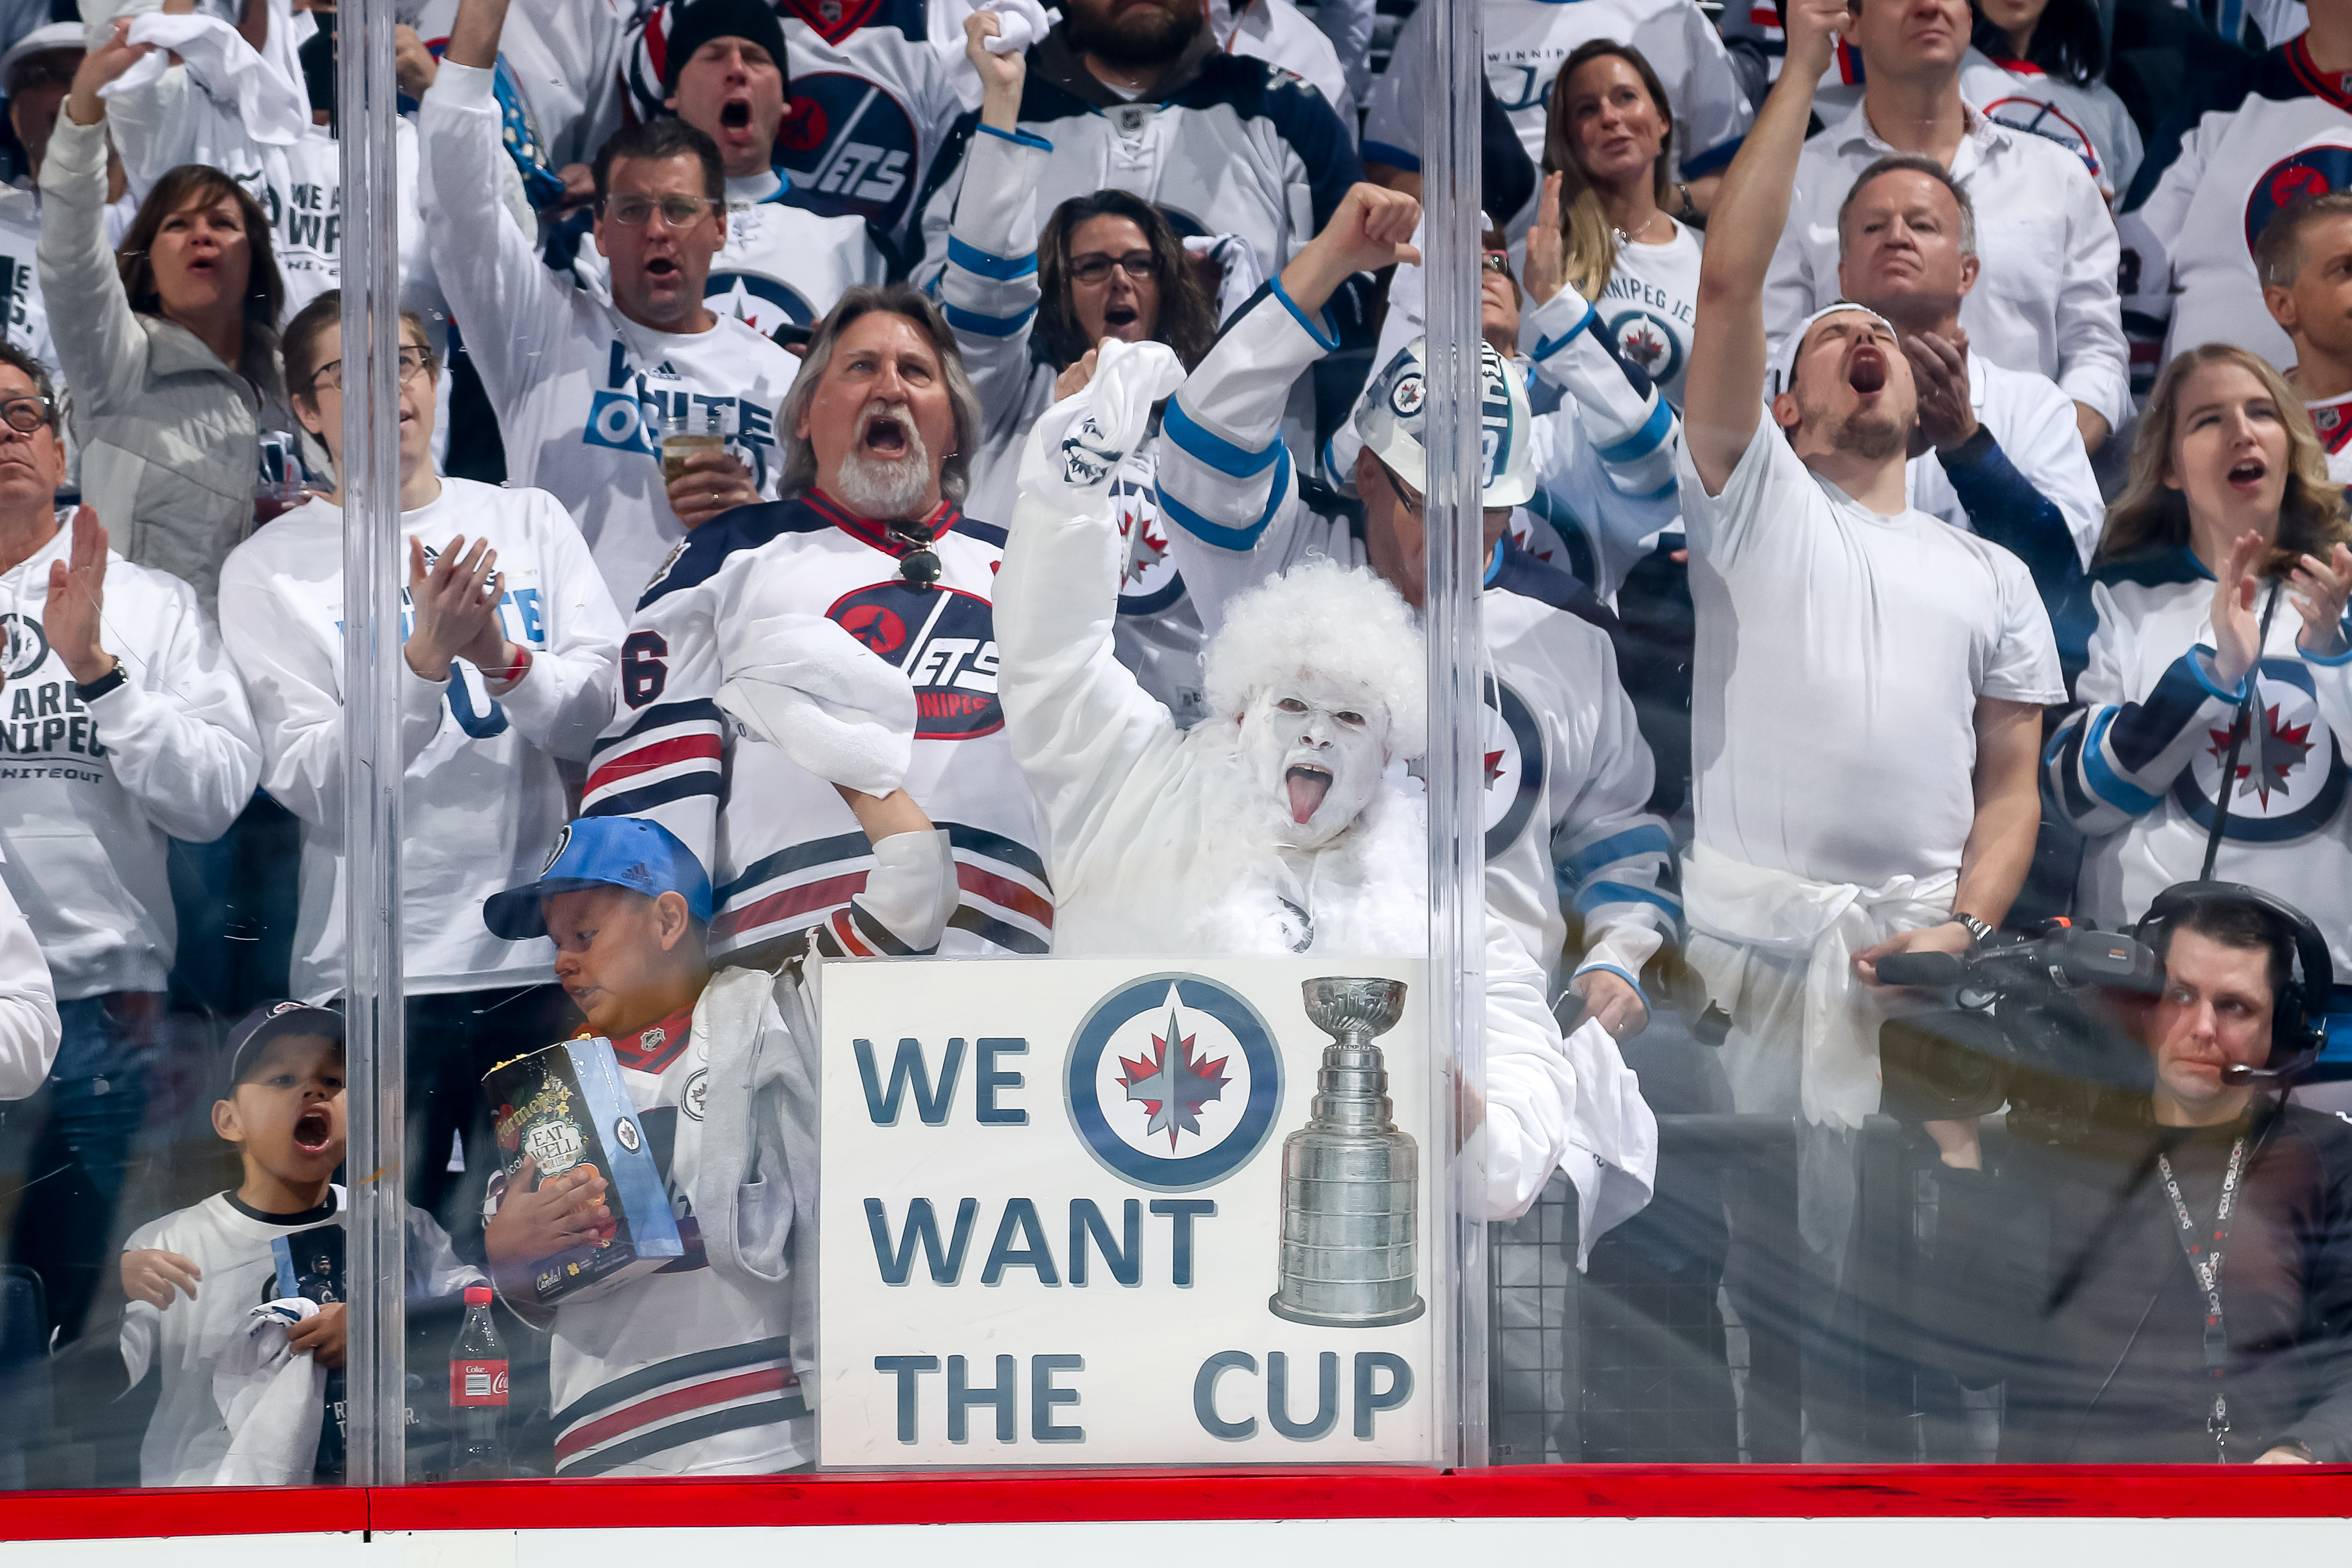 Winnipeg Jets fans clad in all white cheer wildly prior to NHL action between the Jets and the Minnesota Wild in Game Five of the Western Conference First Round during the 2018 NHL Stanley Cup Playoffs at the Bell MTS Place on April 20, 2018 in Winnipeg, Manitoba, Canada. (Photo by Jonathan Kozub/NHLI via Getty Images)